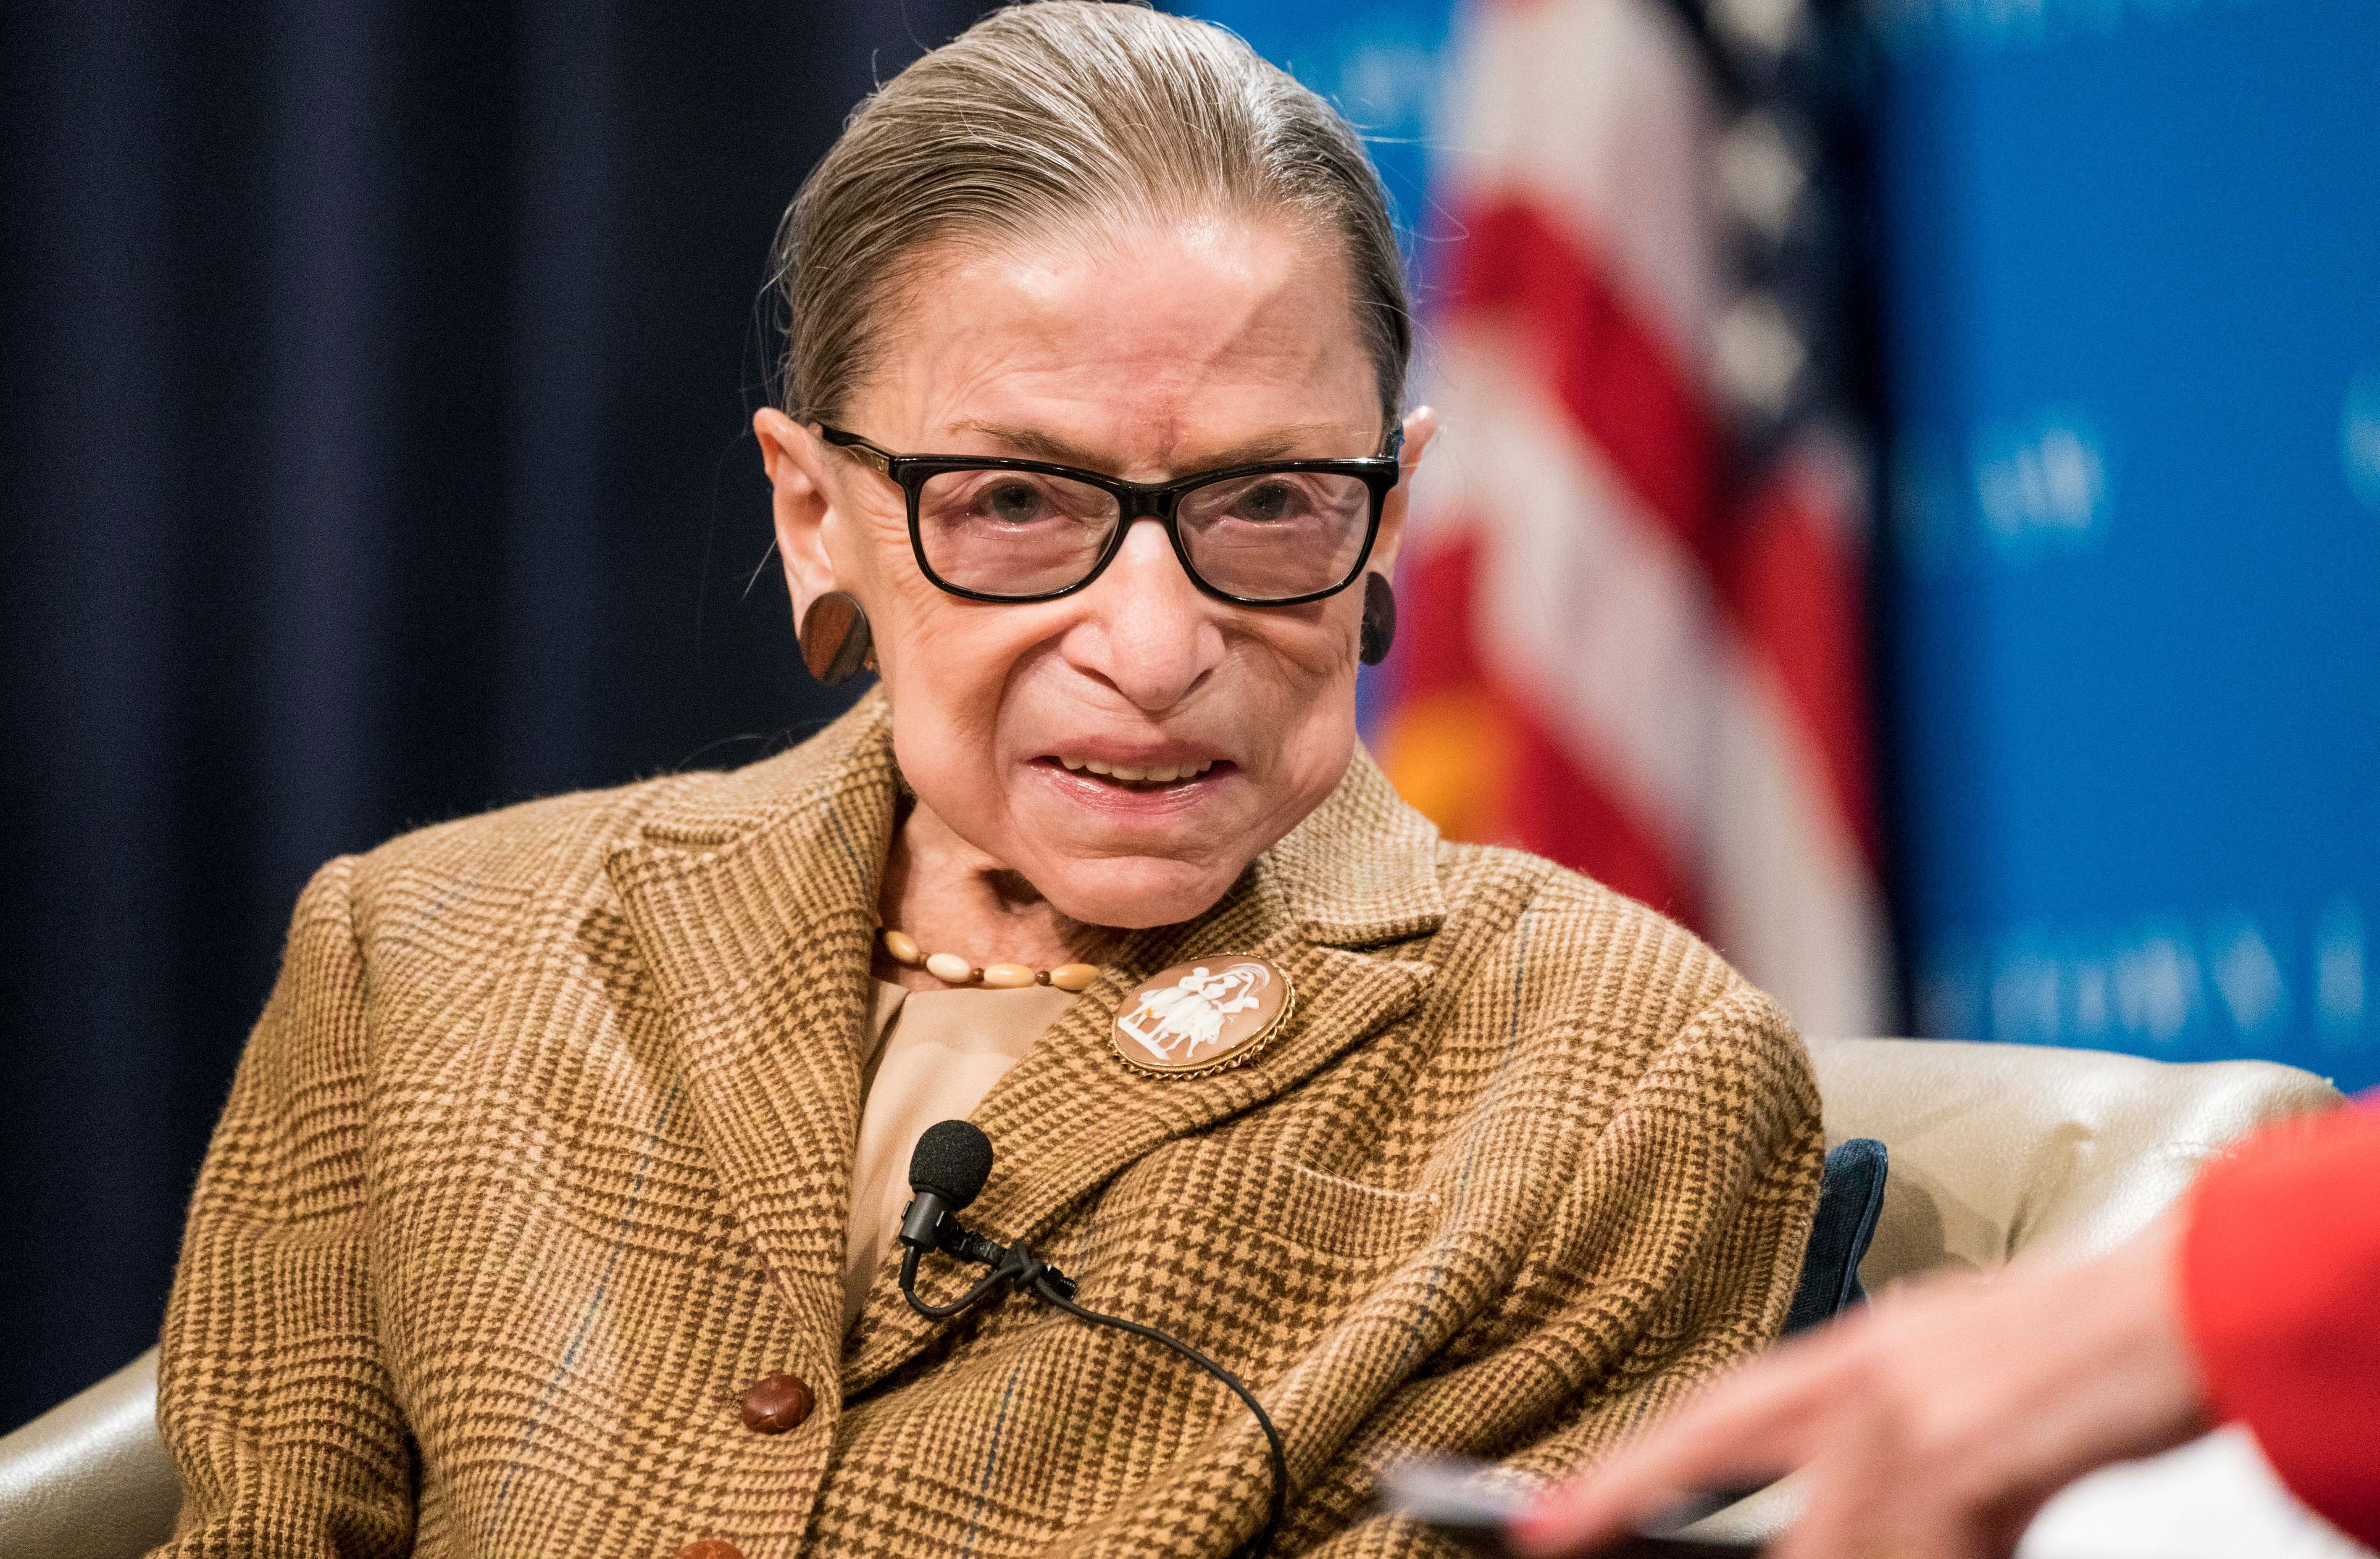 Ruth Bader Ginsburg during a discussion at the Georgetown University Law Center on February 10, 2020 in Washington, DC. | Source: Getty Images